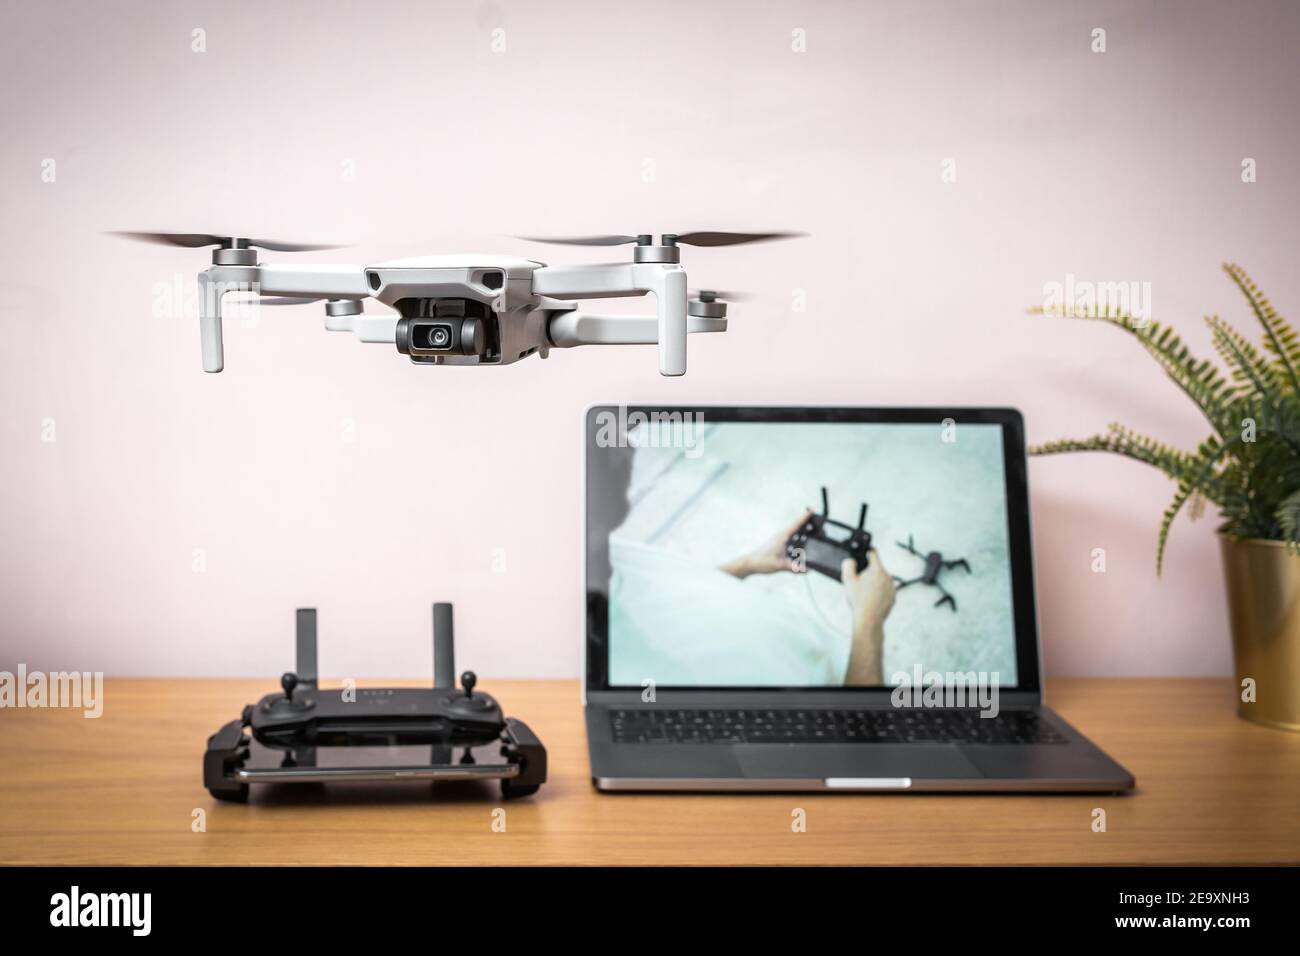 Learn how to fly drone flying in the air indoors safely with radio controller and laptop computer in the background showing online tutorial guide Stock Photo